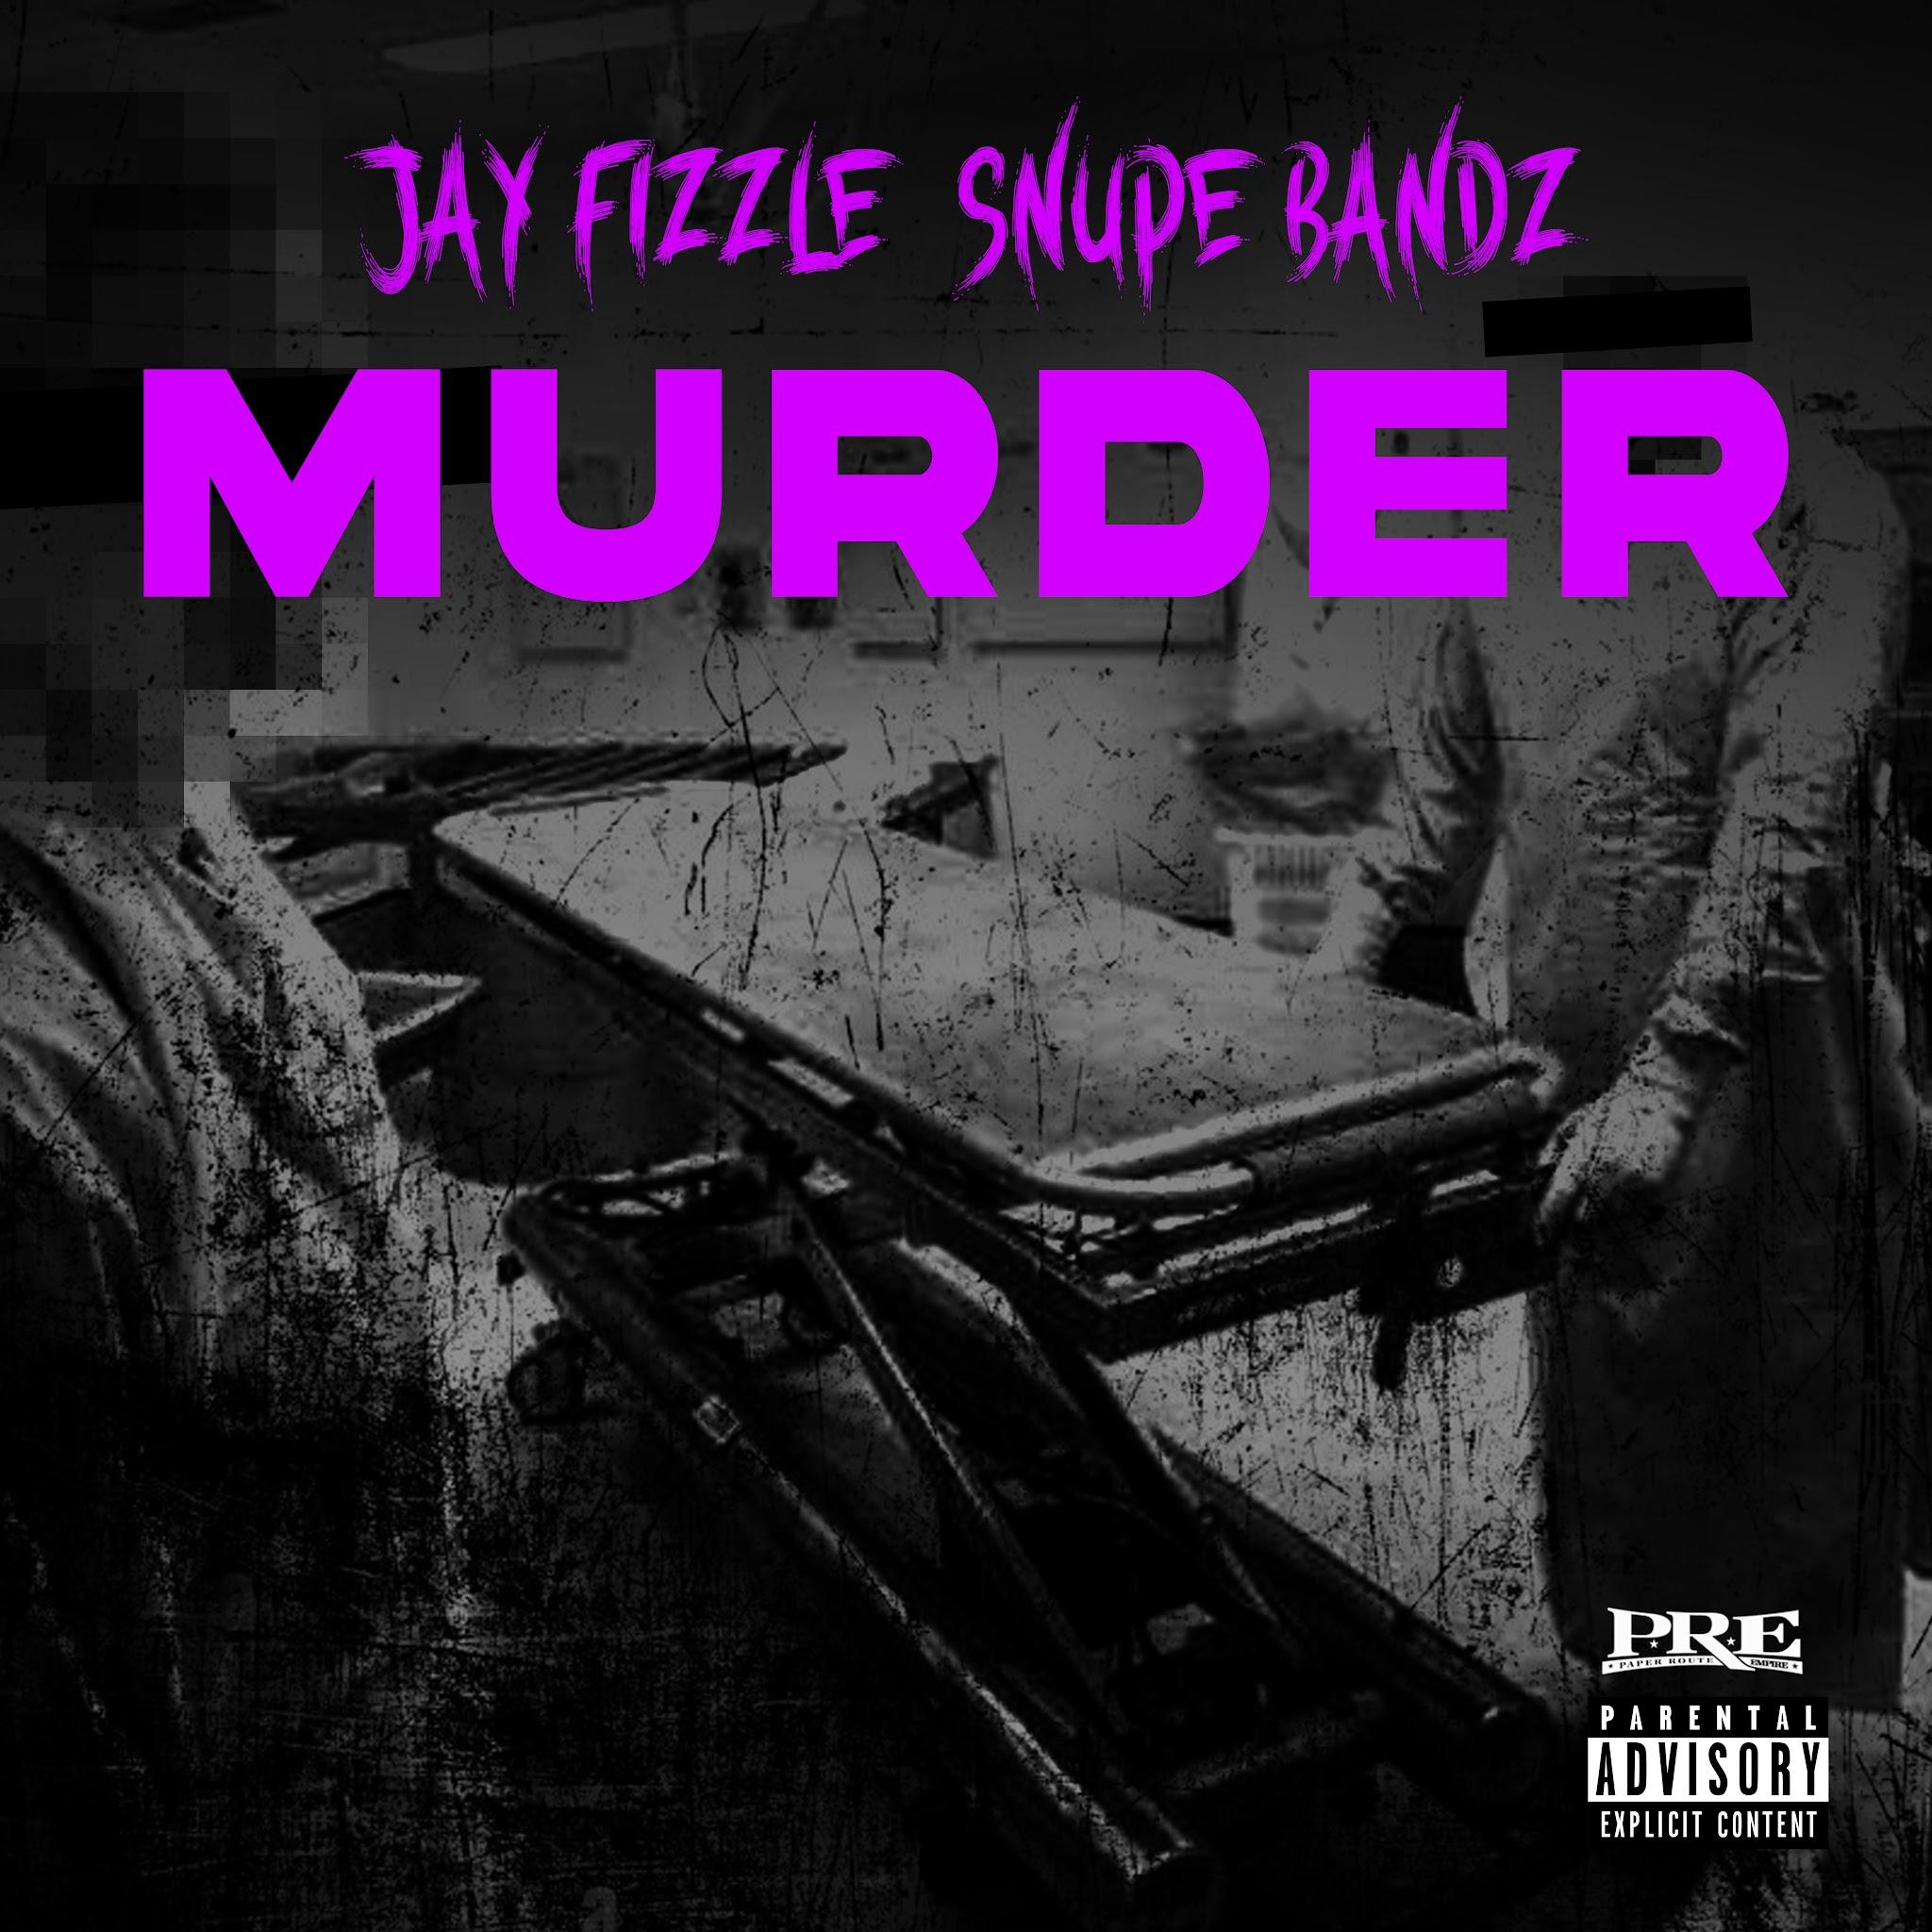 Jay Fizzle and Snupe Bandz "Murder" Artwork